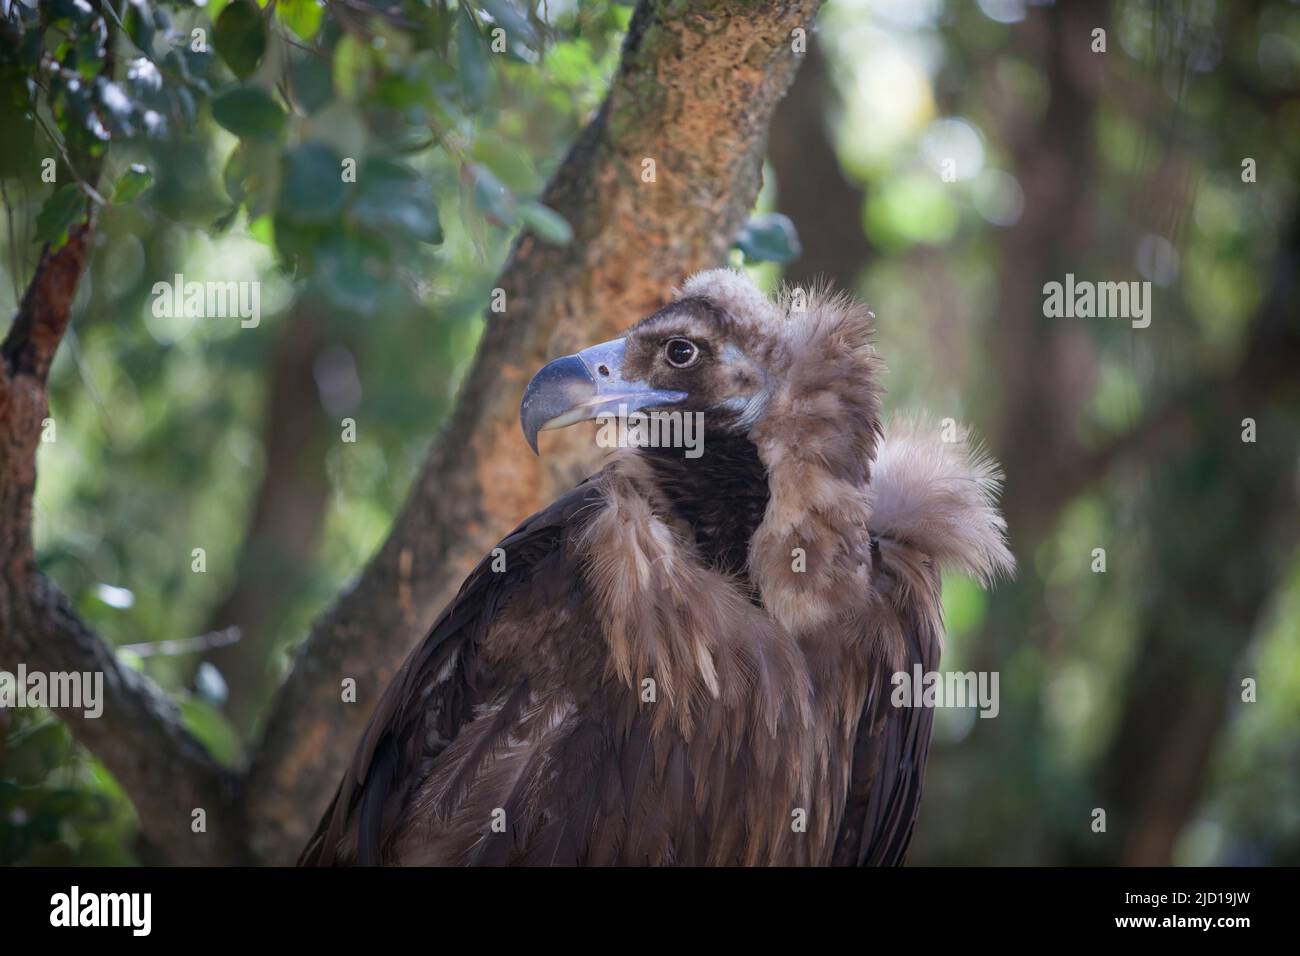 Cinereous vulture perched in forest, also named Aegypius monachus. Selective focus Stock Photo